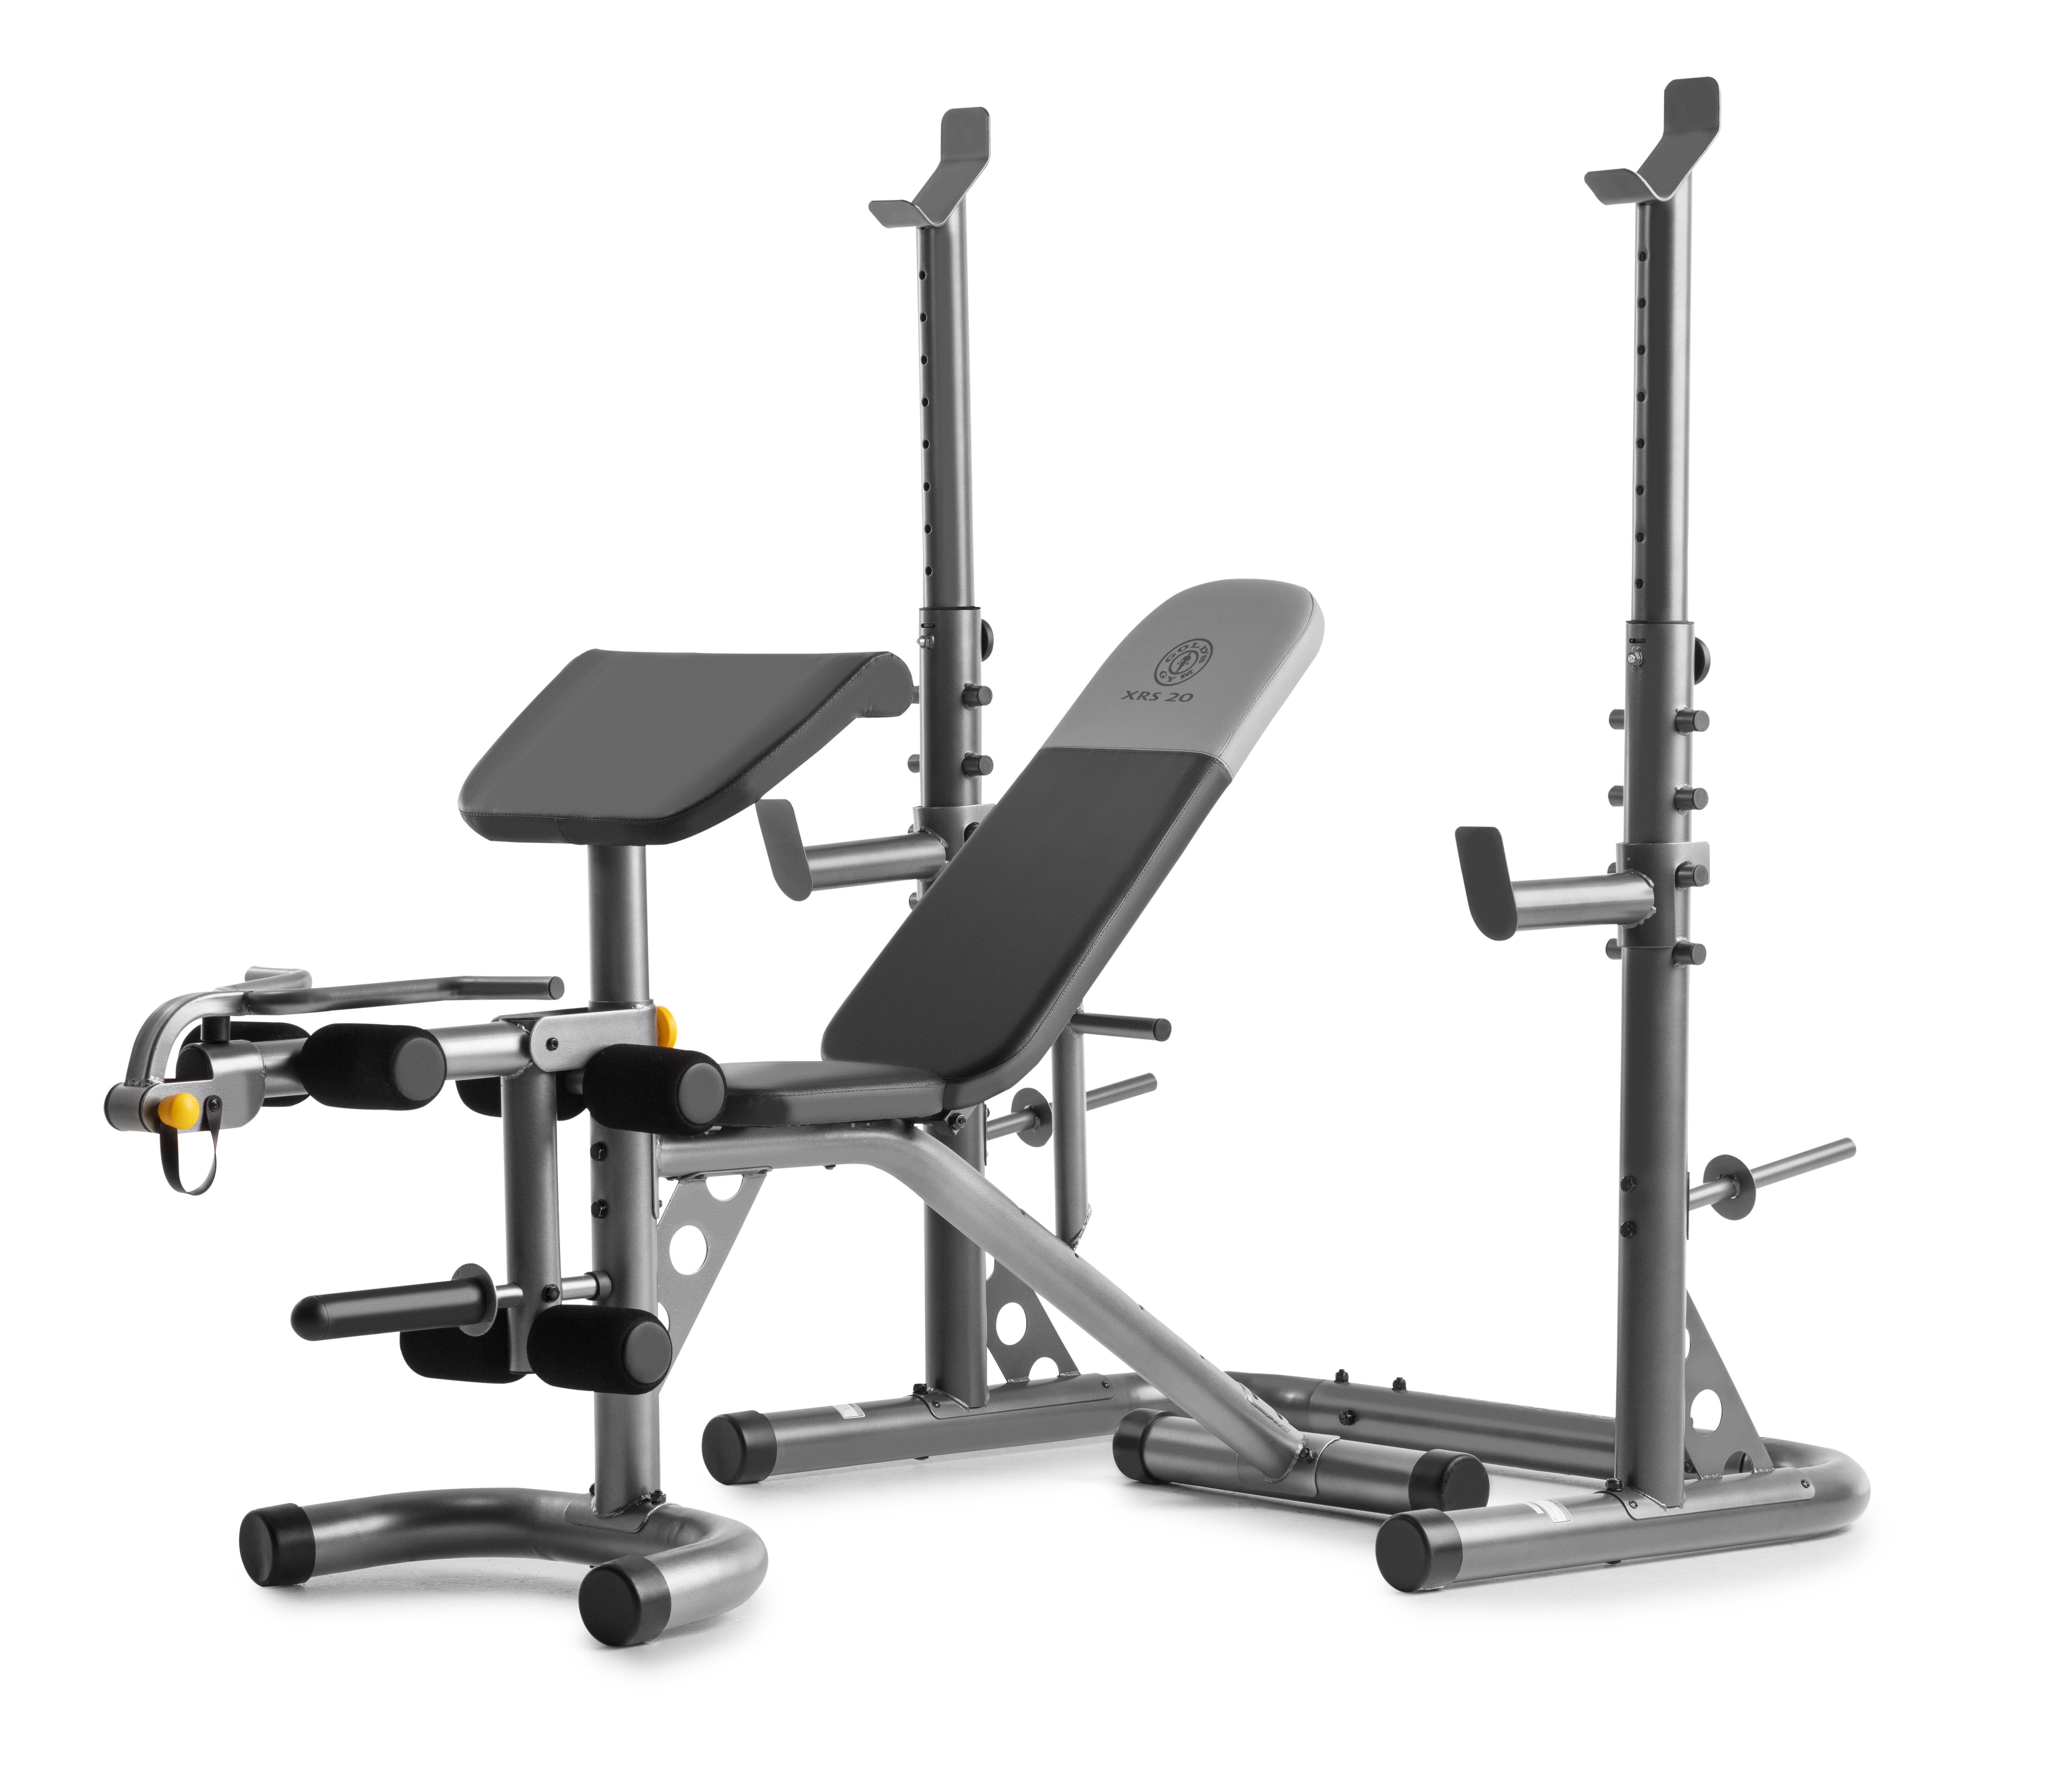 Buy Body Solid Flat Incline Decline Bench Gfid71 Price India Online Cost Reviews Gfid71 In Bangalore Mumbai Kochi